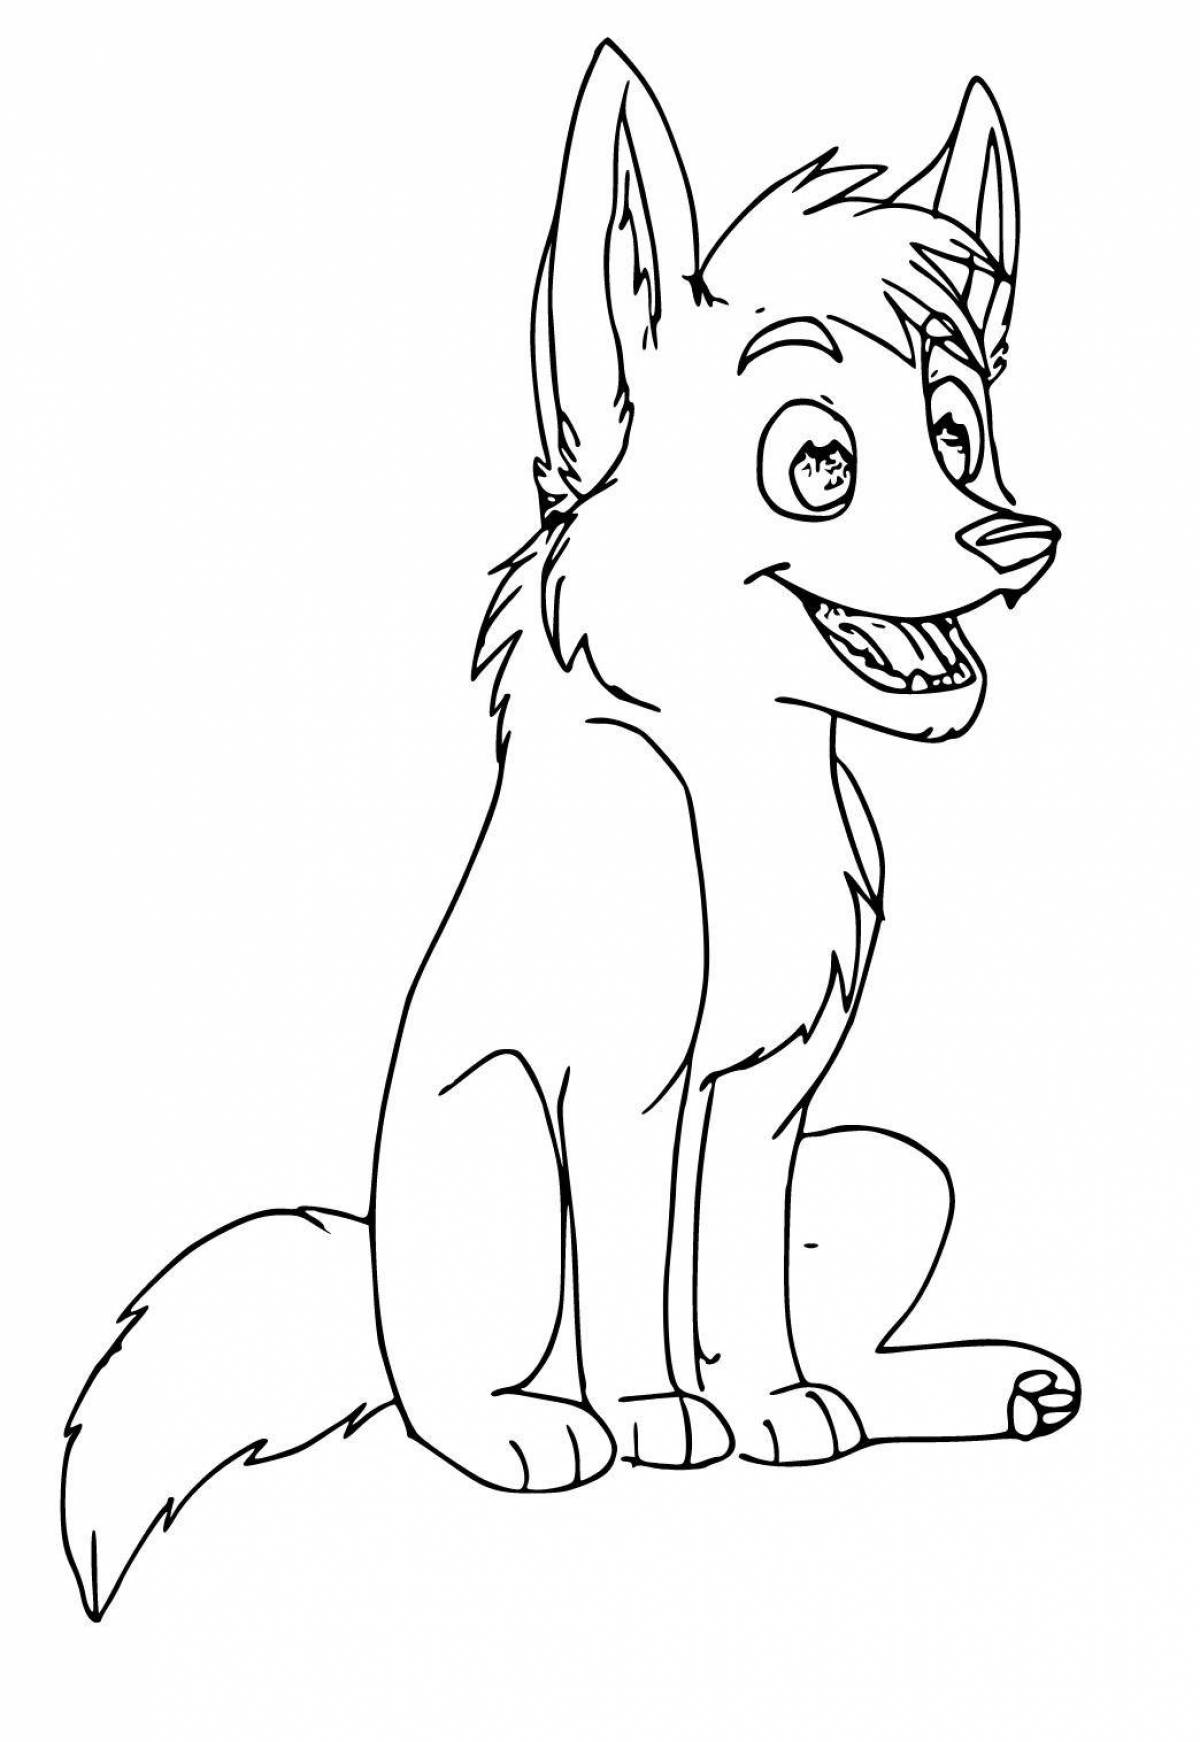 Colouring awesome wolf cub